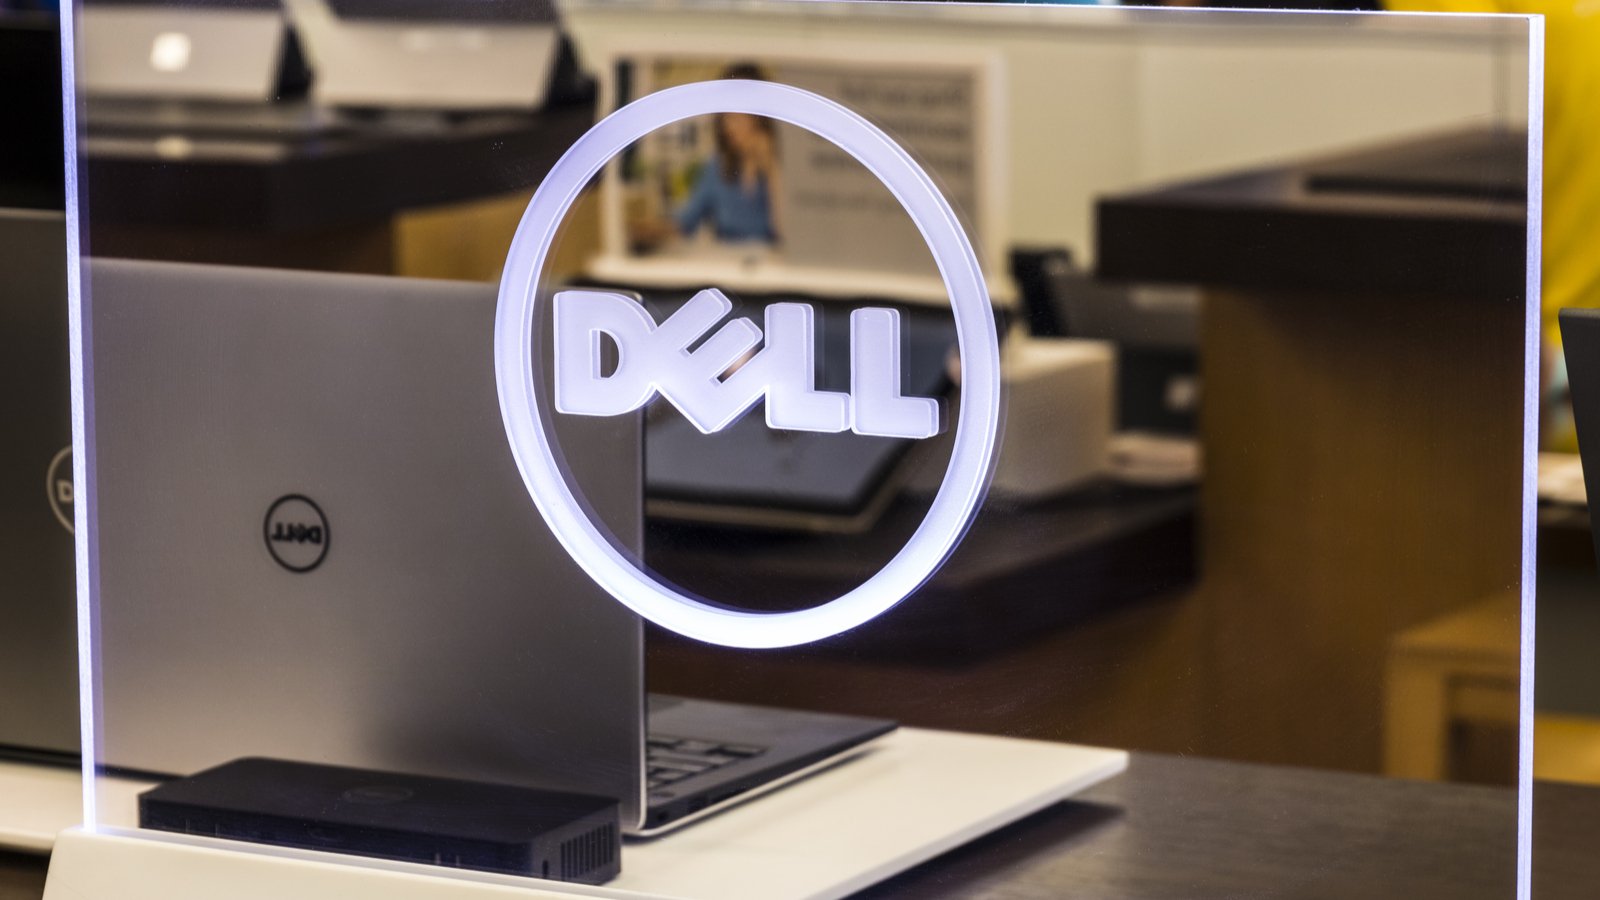 Is Dell Technologies (DELL) a Buy, Sell, or Hold? | InvestorPlace